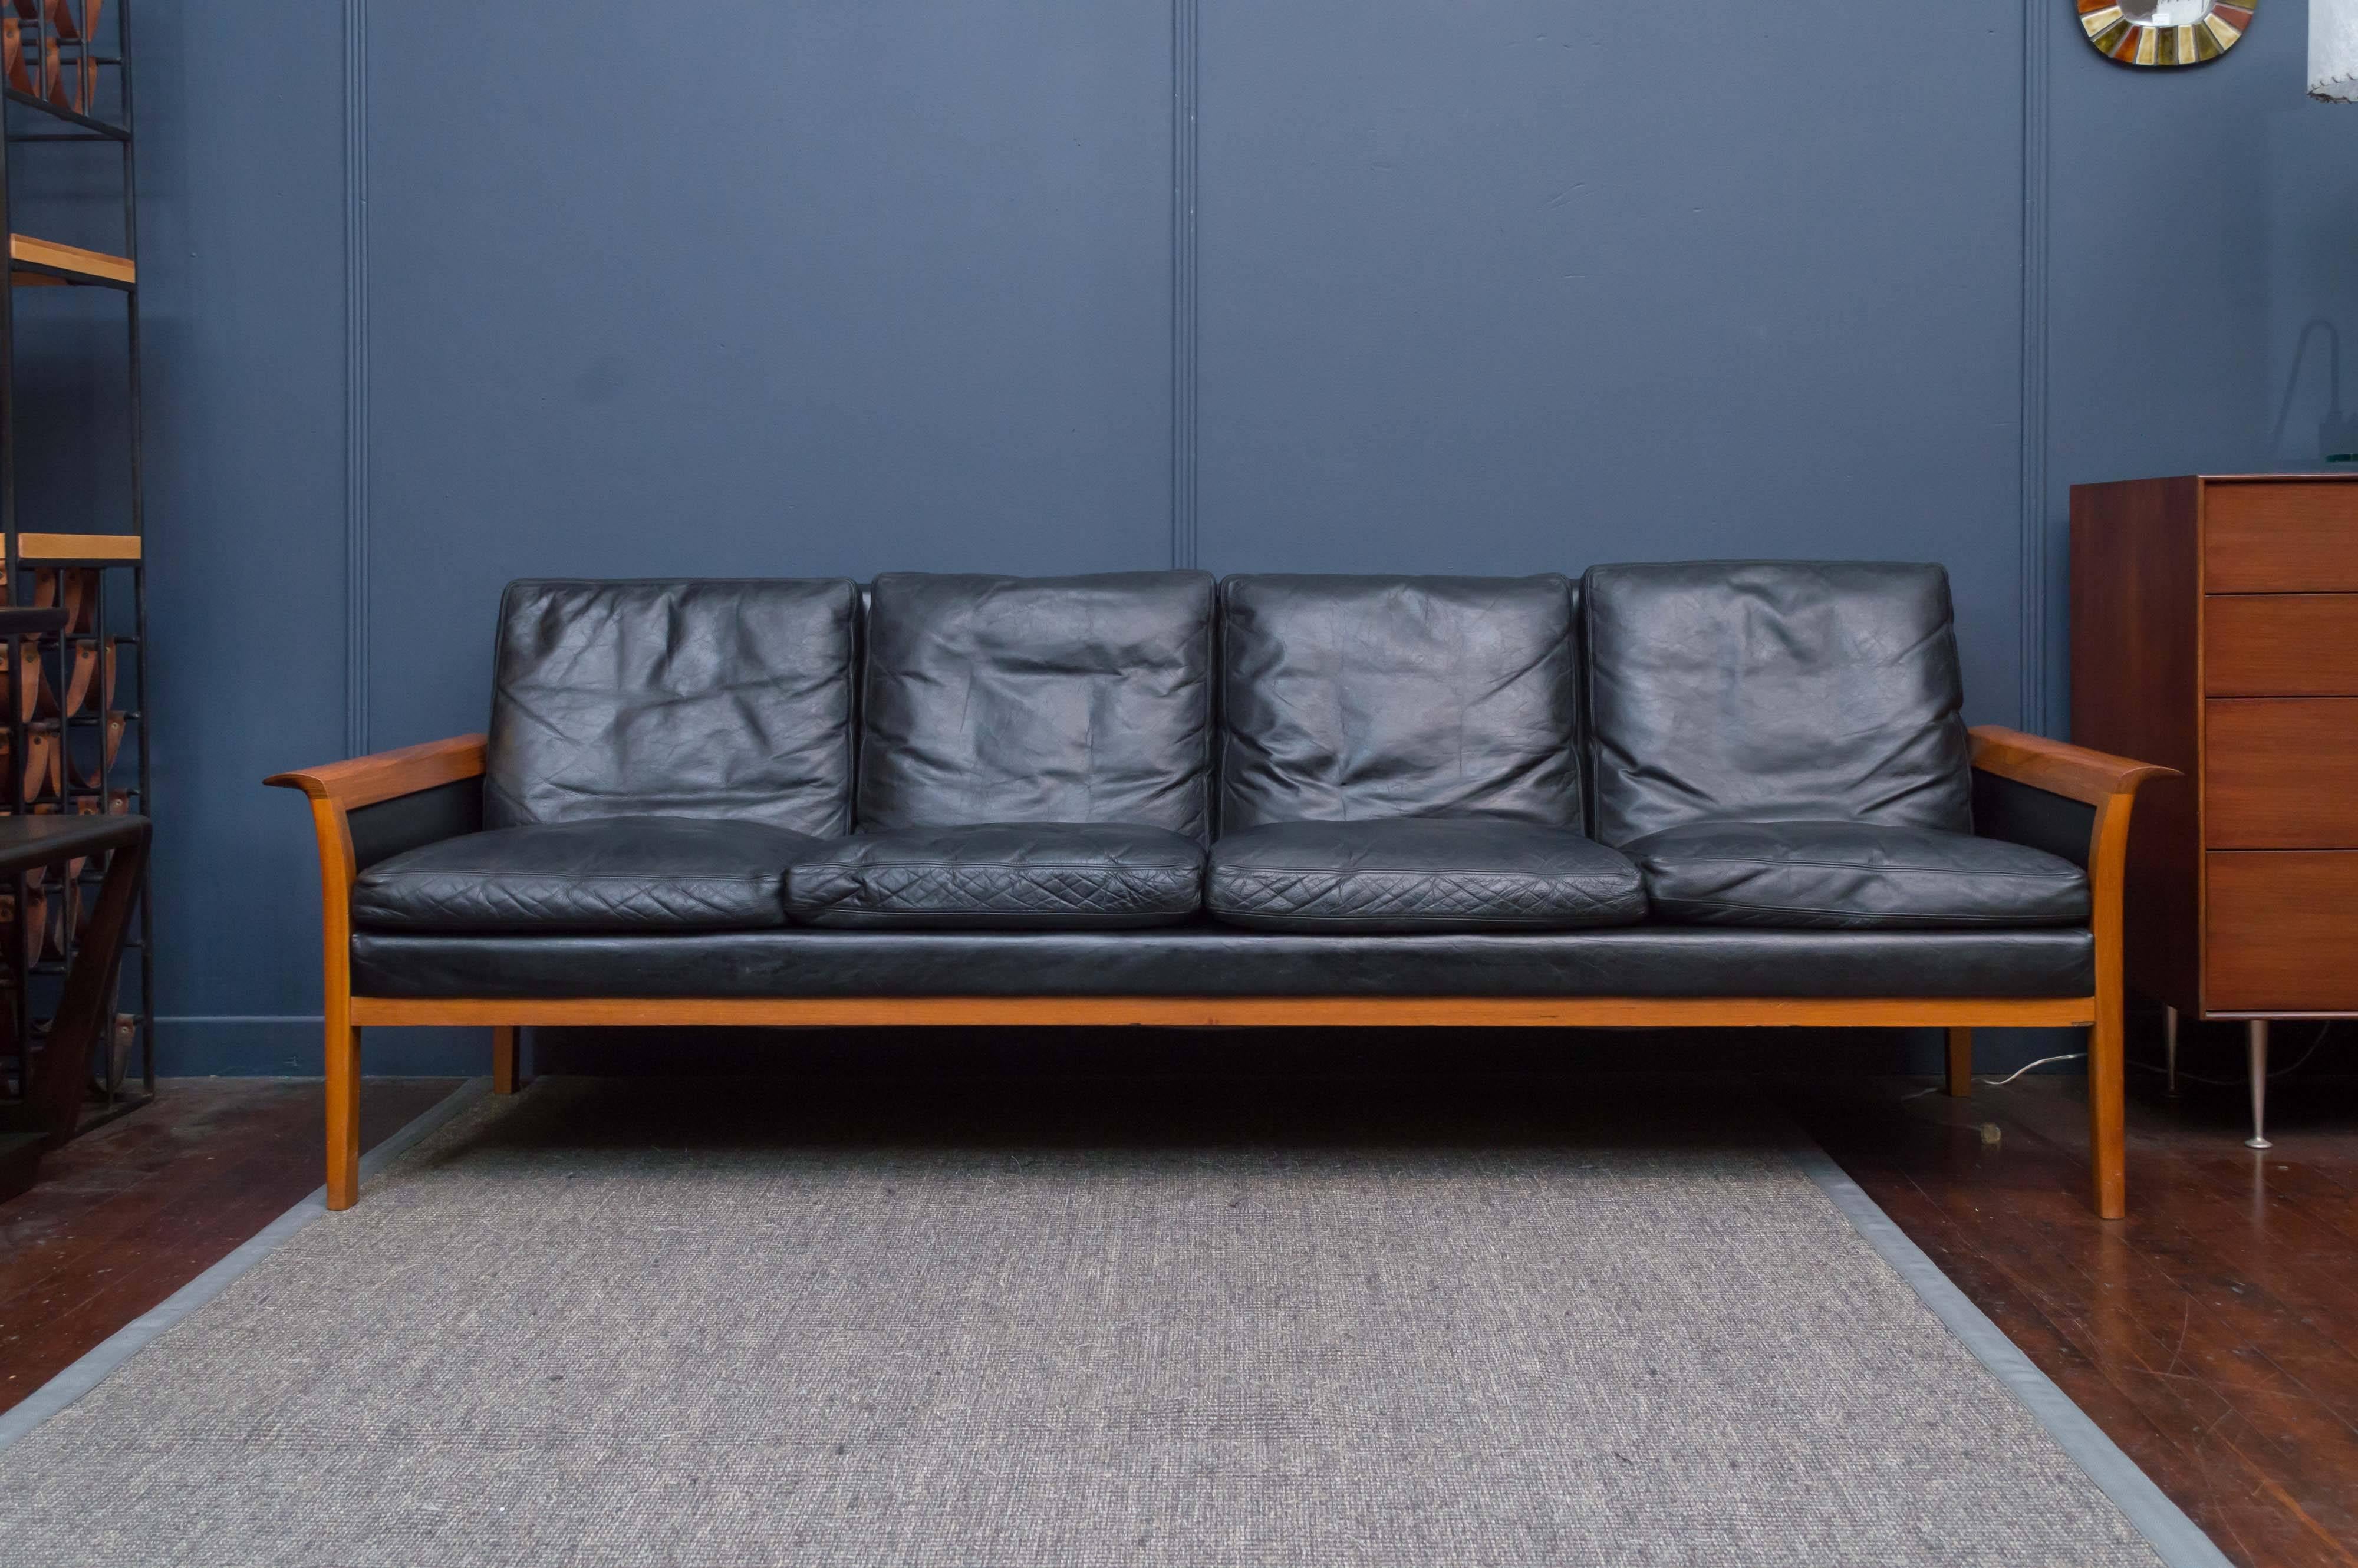 Extremely comfortable four-seat leather sofa designed by Hans Olsen for Vatne Mobler, Denmark.
Excellent original condition, a pair of matching armchairs are available separately.